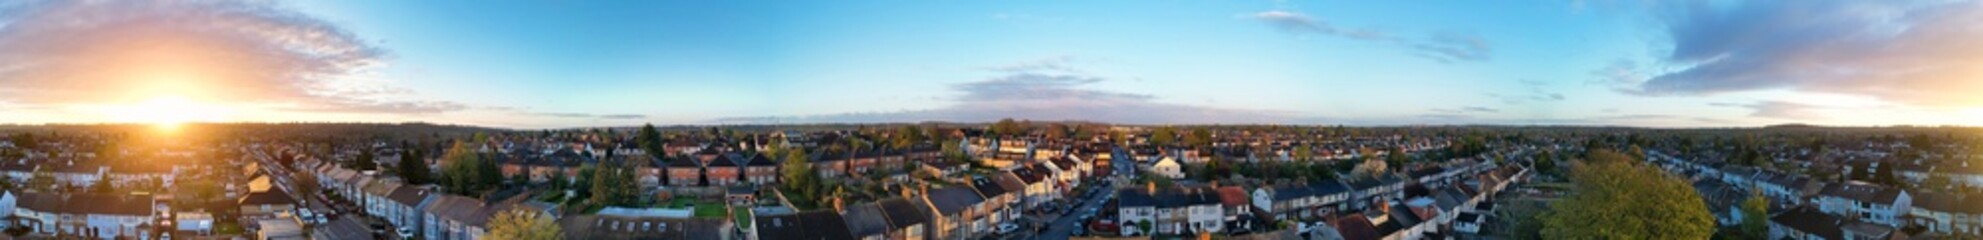 Fototapeta na wymiar Aerial View of Residential Homes at Luton City of England UK During Sunrise.